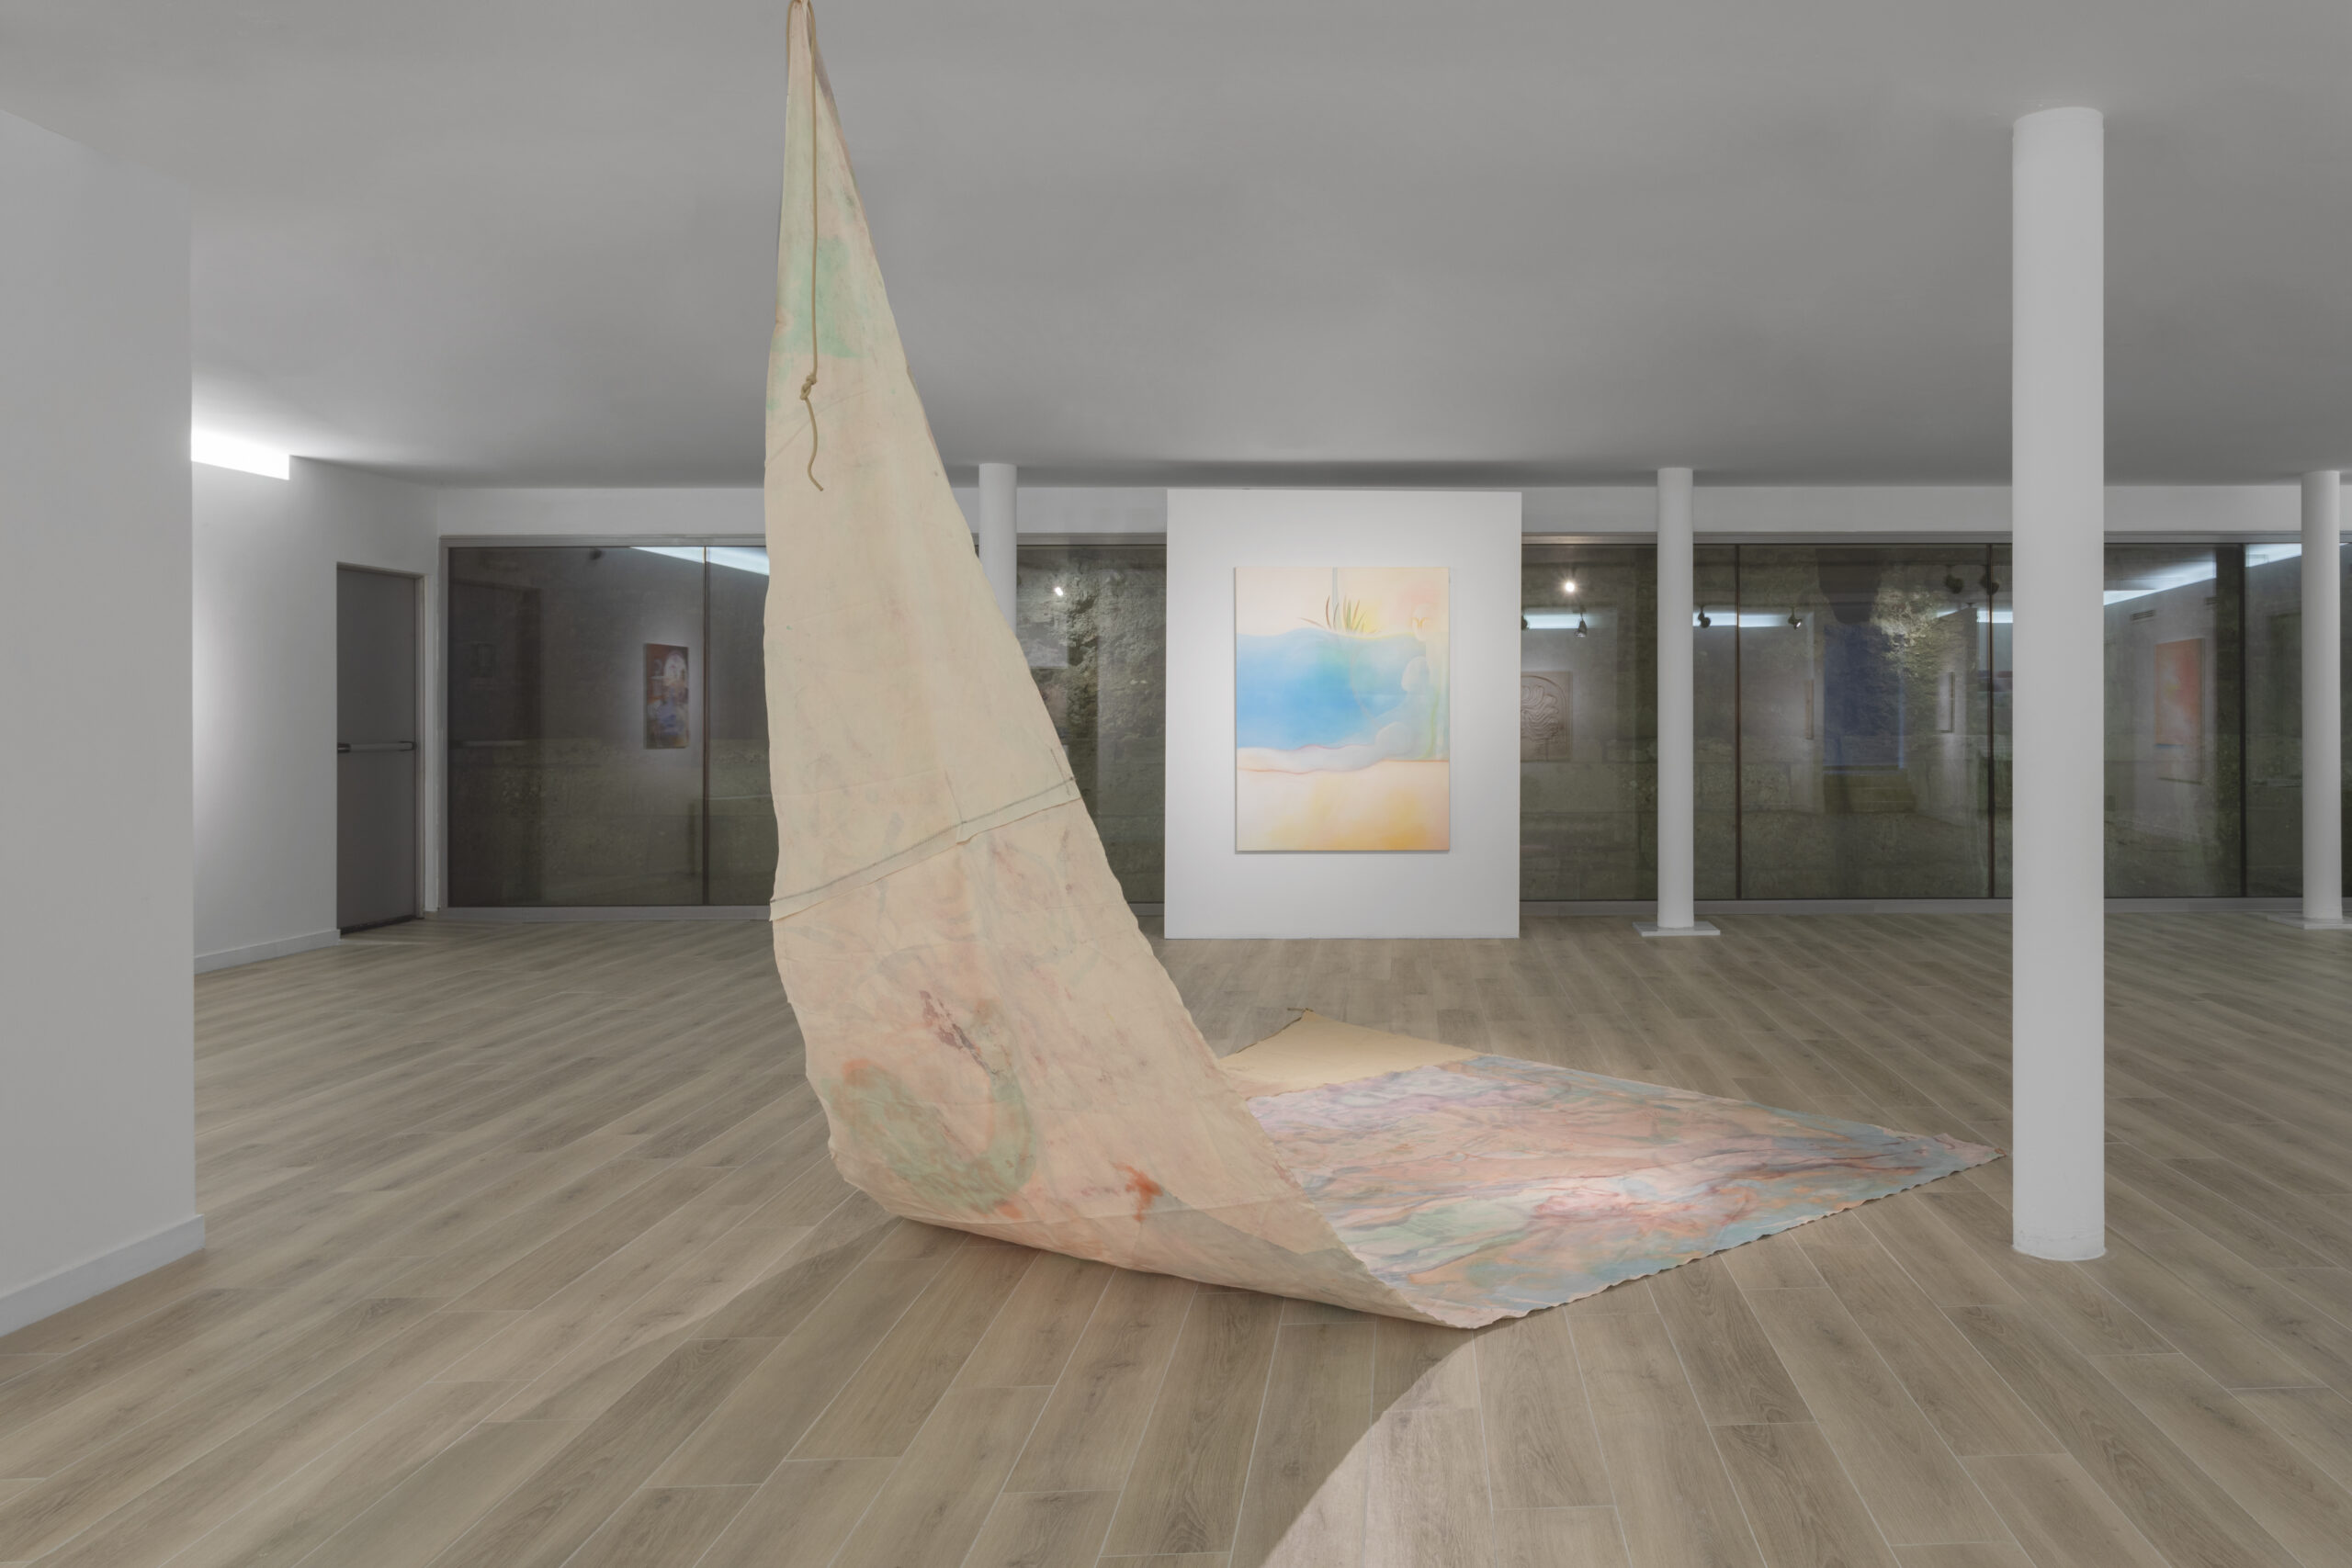 Charlott Weise, Sail, textile paint, pastes, ink and pigments on canvas, shell, epoxy, rope, 500 x 300 cm || Tal Regev, They can pull you deep under the water, 2020, oil on canvas, 160 x 120 cm